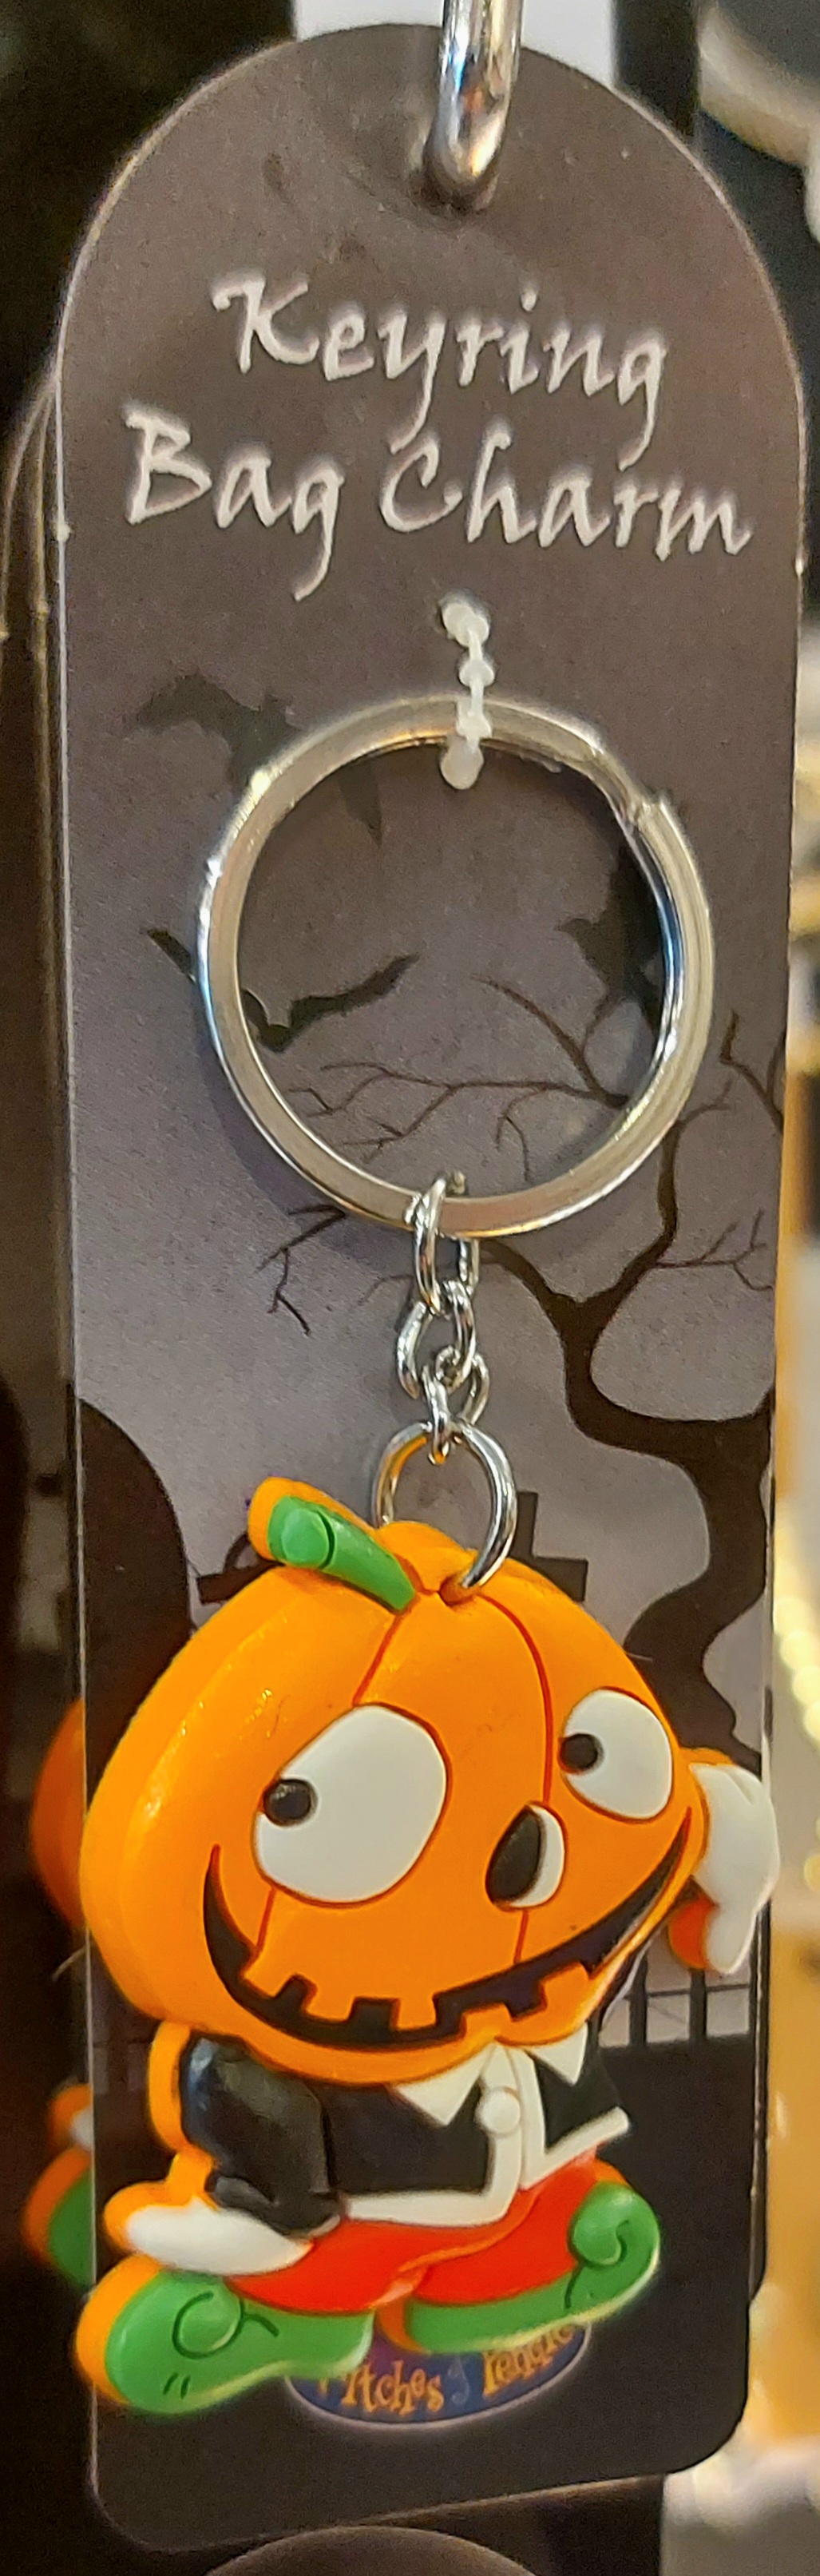 Witches of pendle 3d keyring